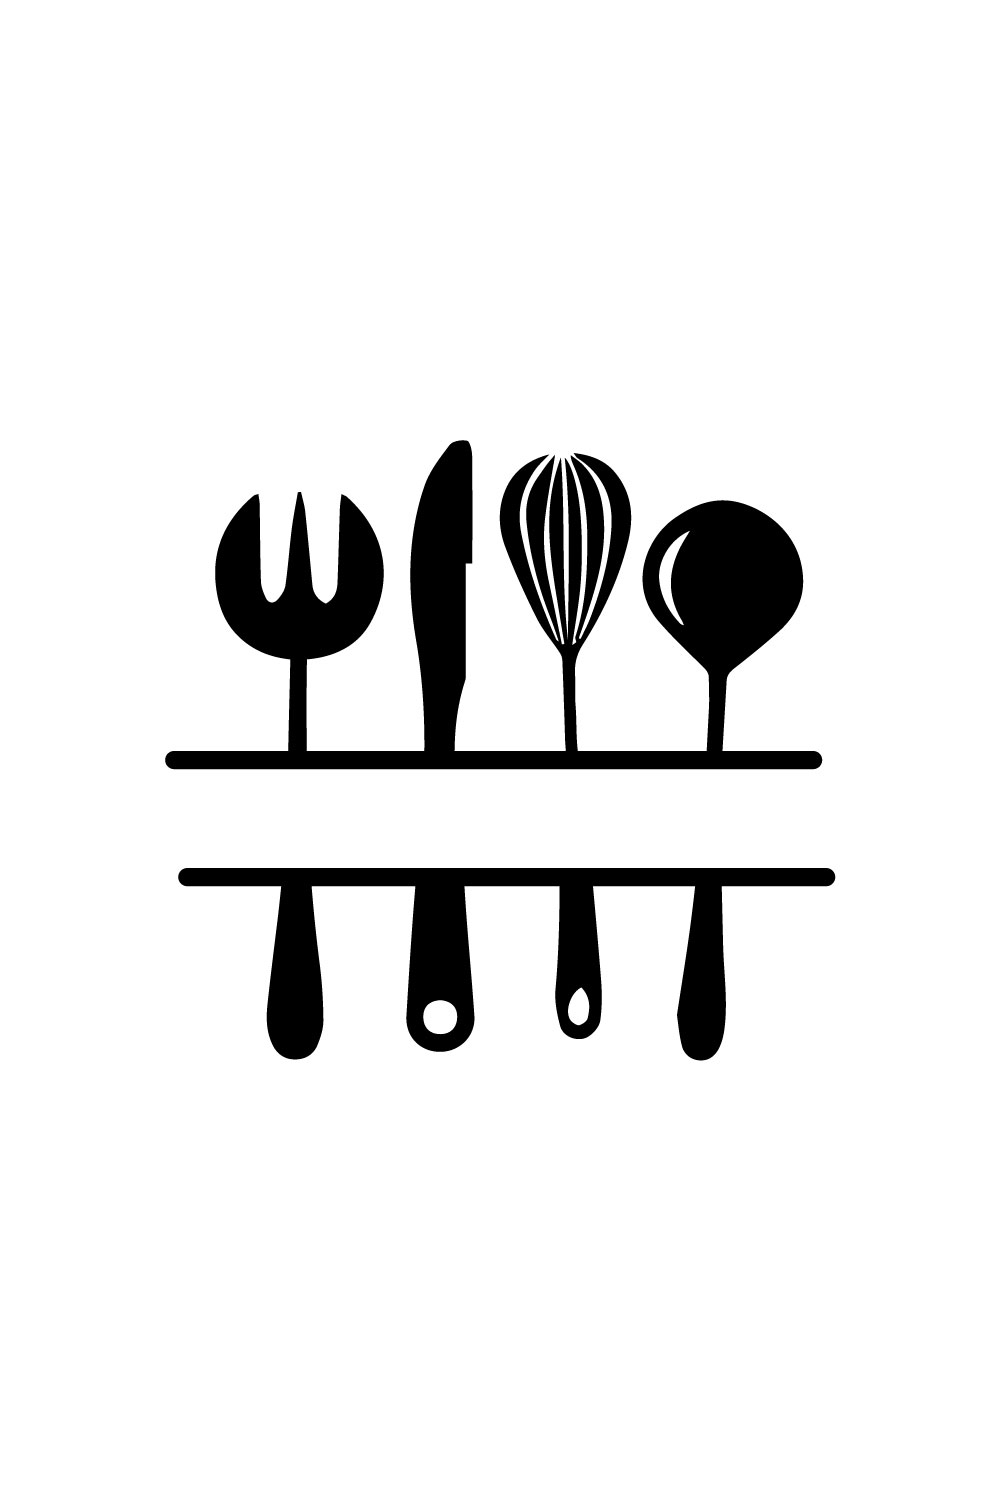 Free spoon wildflower logo pinterest preview image.